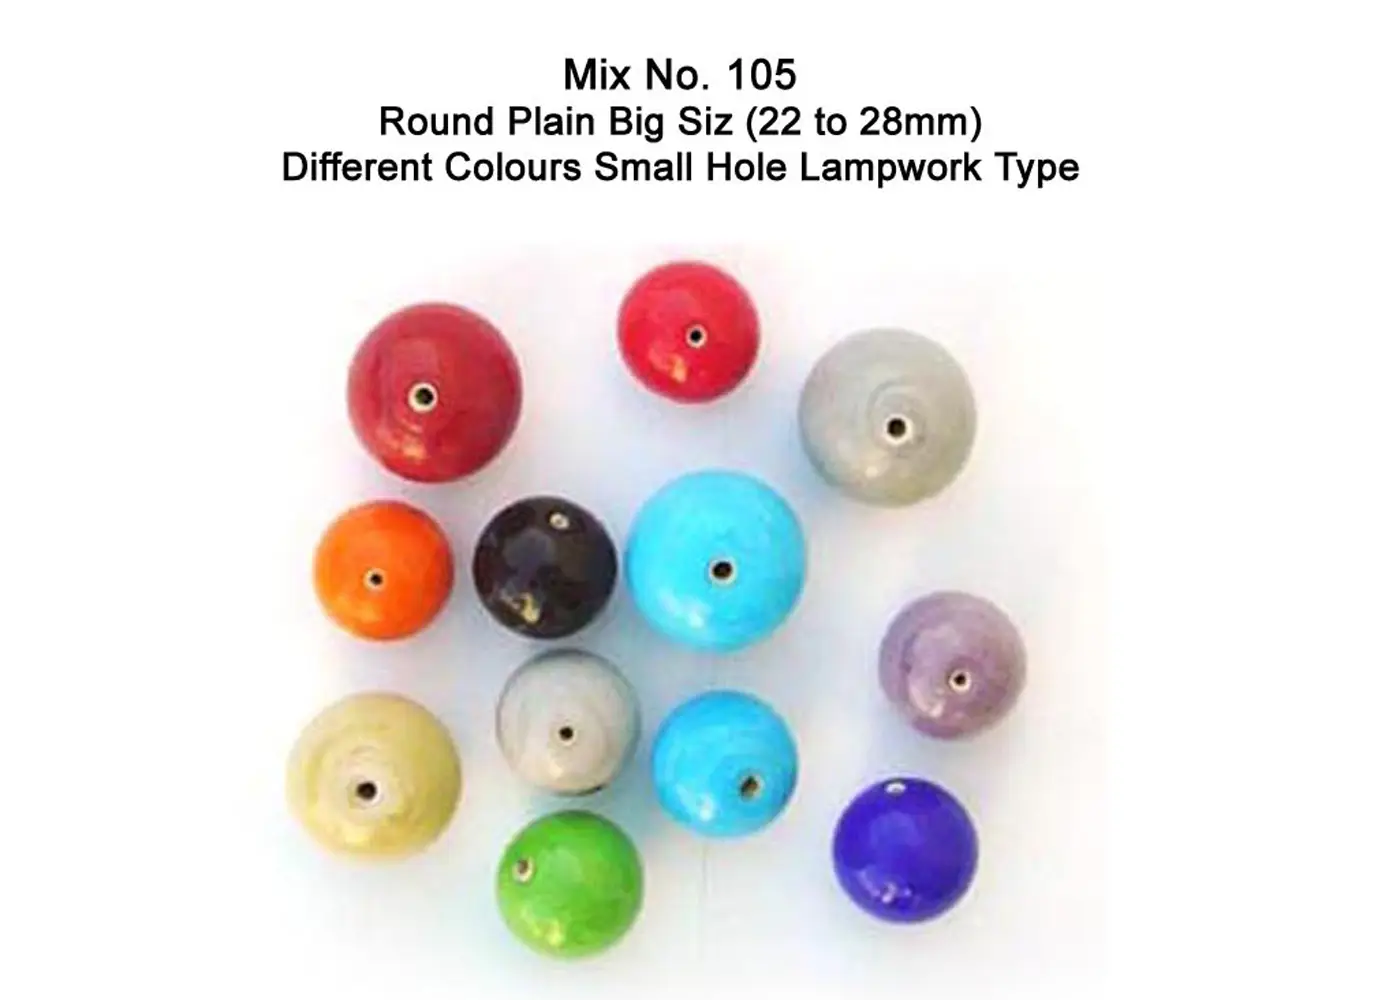 Round Plain big size between 22 mm to 28 mm different colors small hole lampwork type